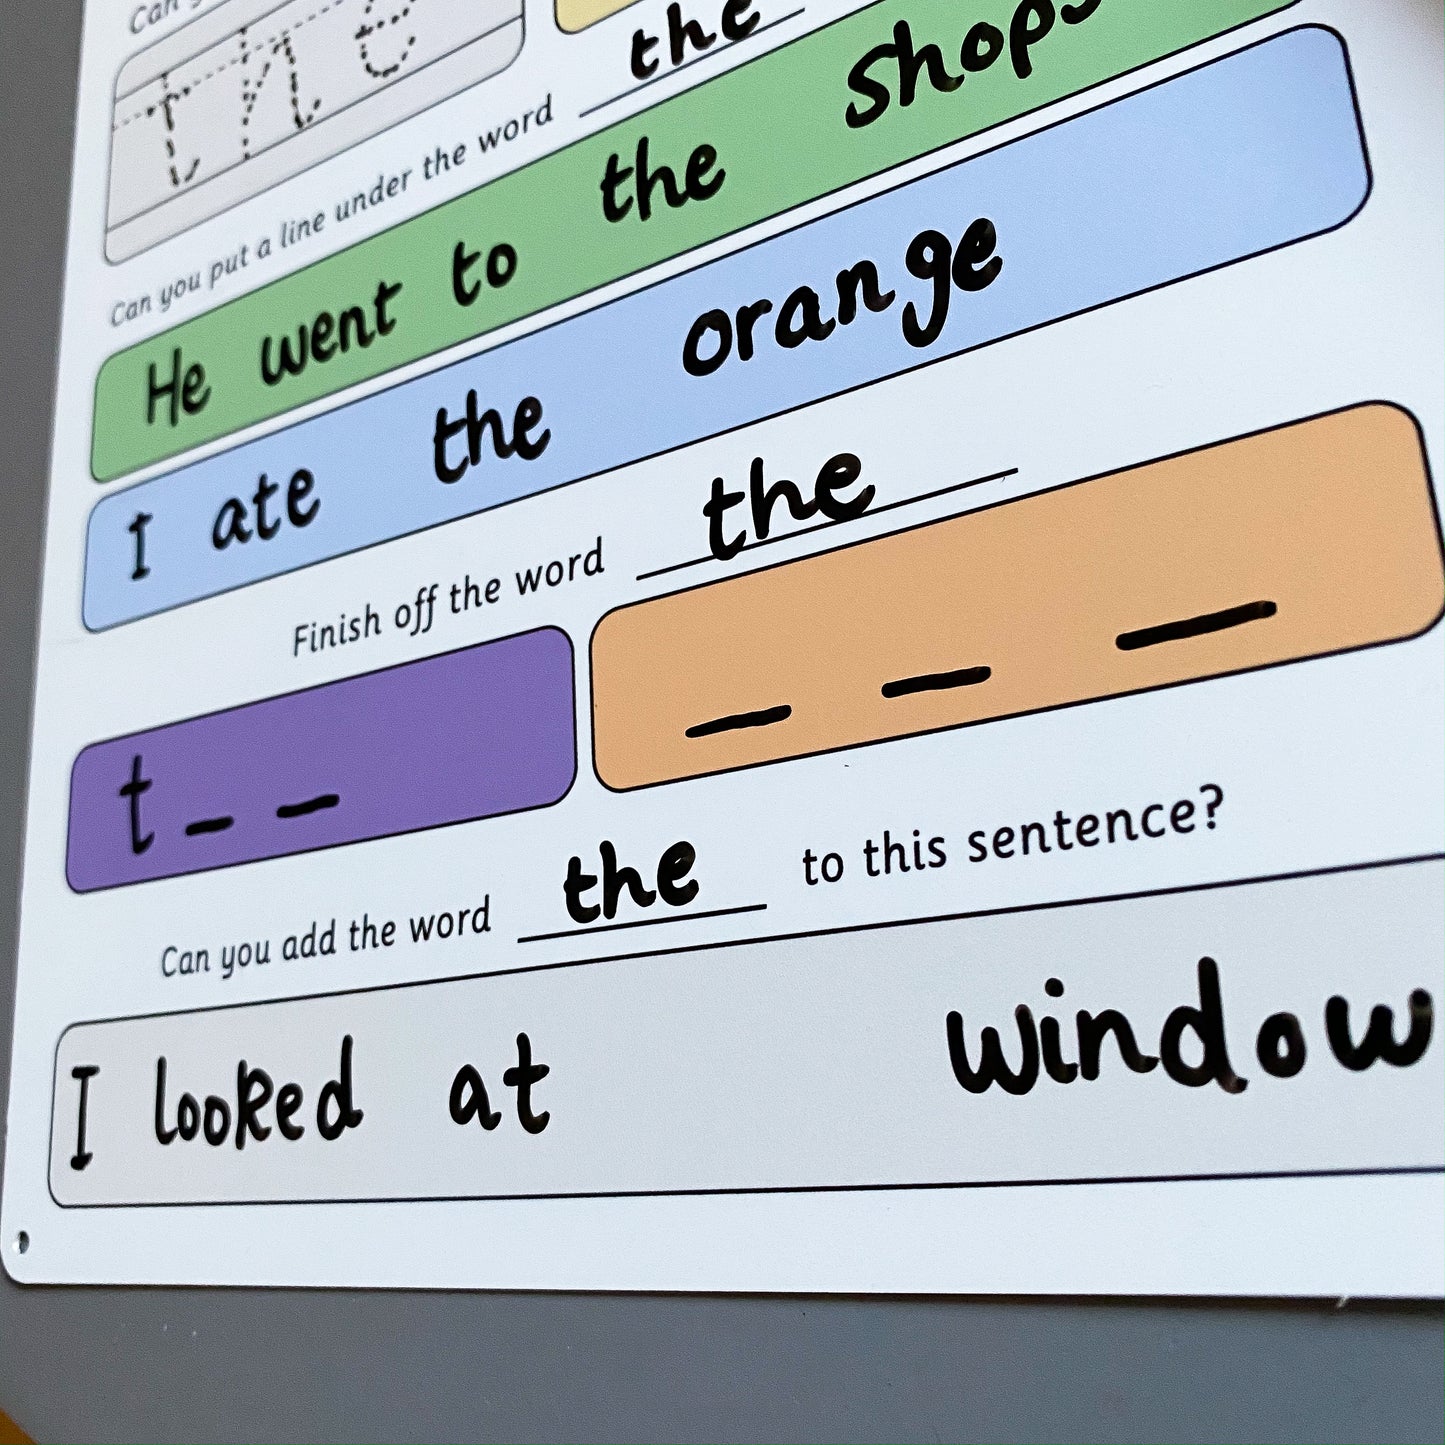 High Frequency Words Practise